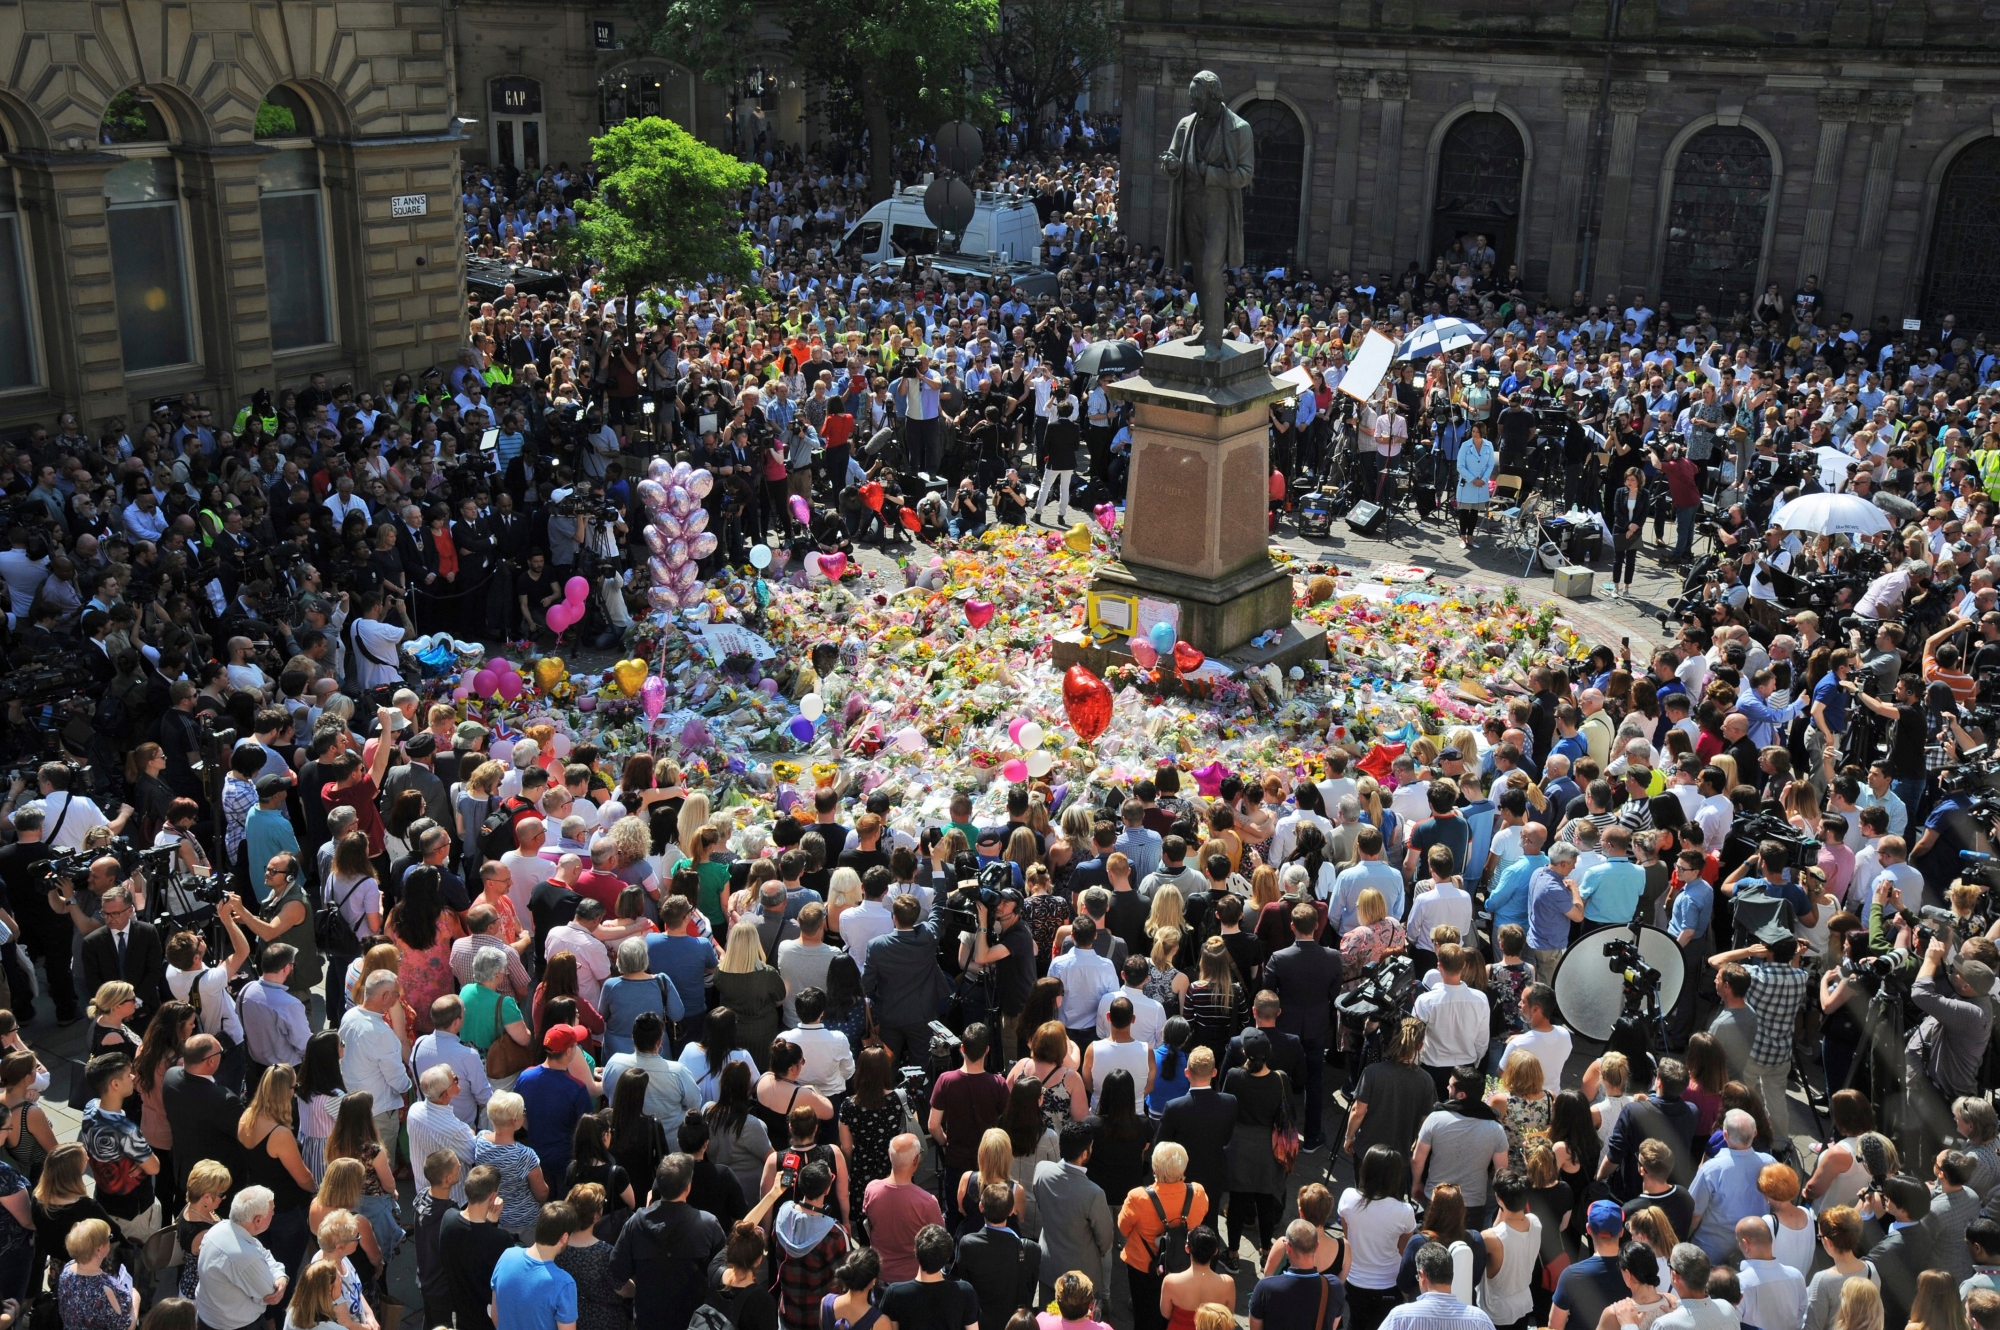 People attend a one minute silence to the victims of Monday's explosion at St Ann's Square in Manchester, England Thursday May 25 2017.  More than 20 people were killed in an explosion following a Ariana Grande concert at the Manchester Arena late Monday evening . (AP Photo/Rui Vieira) Britain Concert Blast